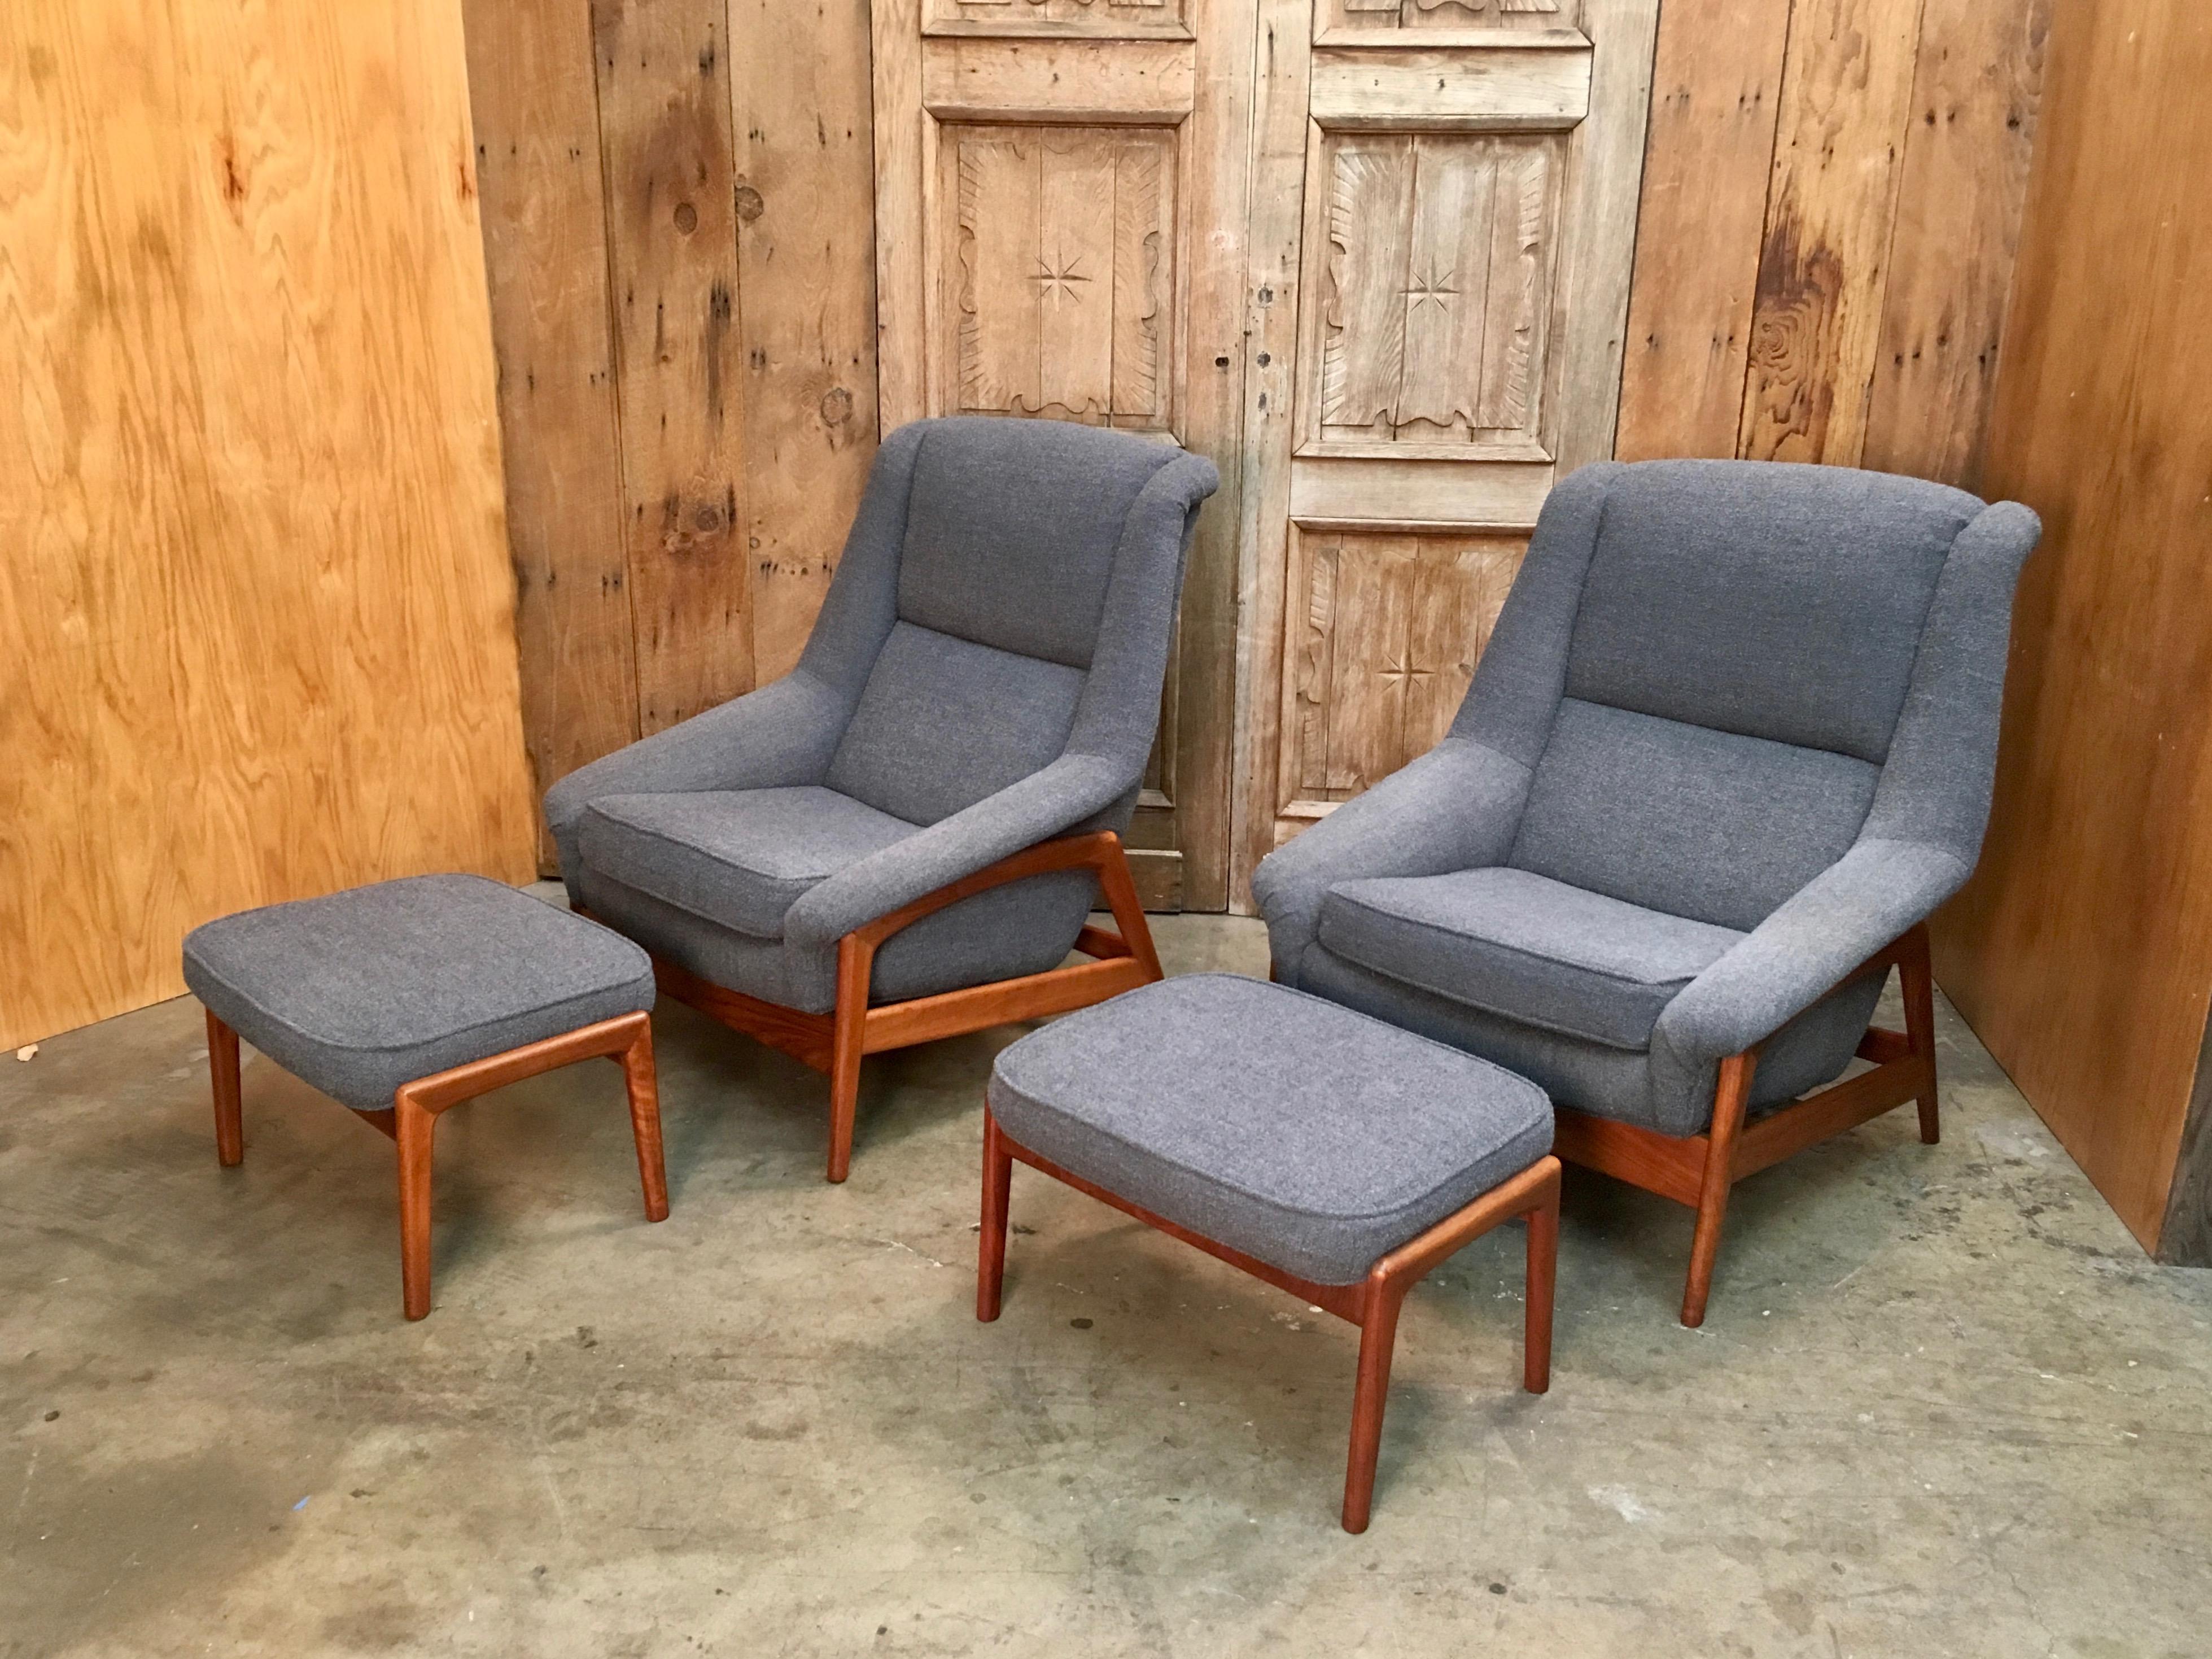 Folke Ohlsson for DUX, reclining rocking chairs and ottomans in Outback by Kvadrot wool bouclé on a teak wood frame with lever-actuated reclining, with matching adjustable ottomans The set consist of two chairs and two ottomans

Measures: Chairs